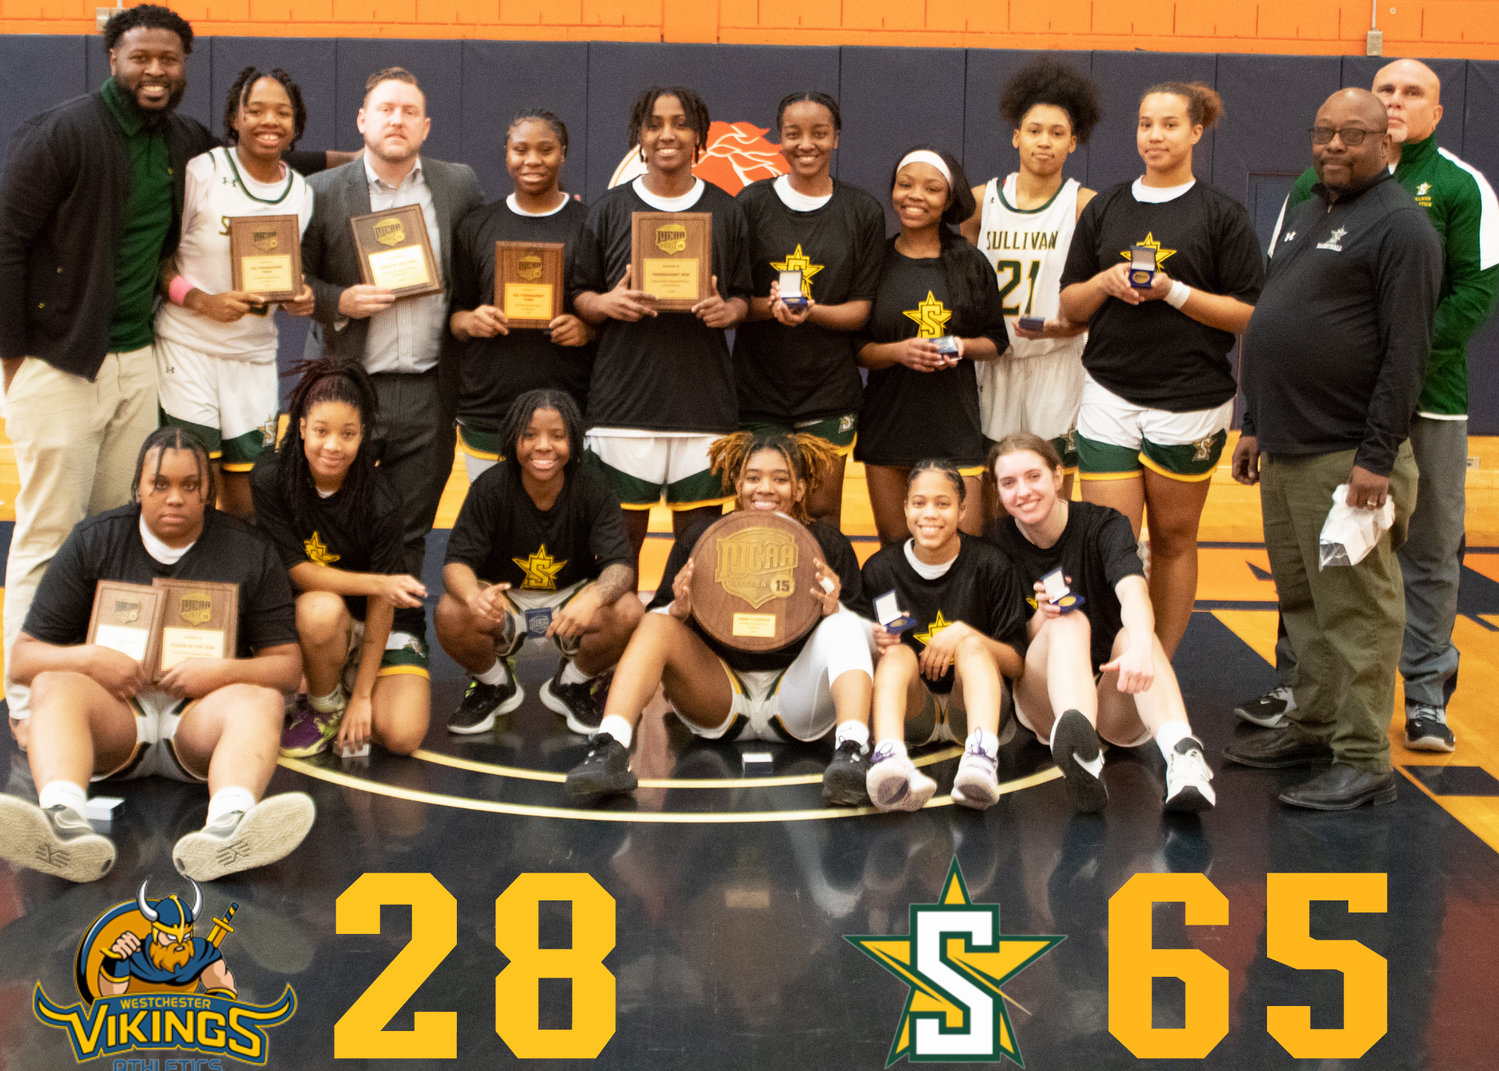 SUNY Sullivan’s Women’s team comes together with their awards.